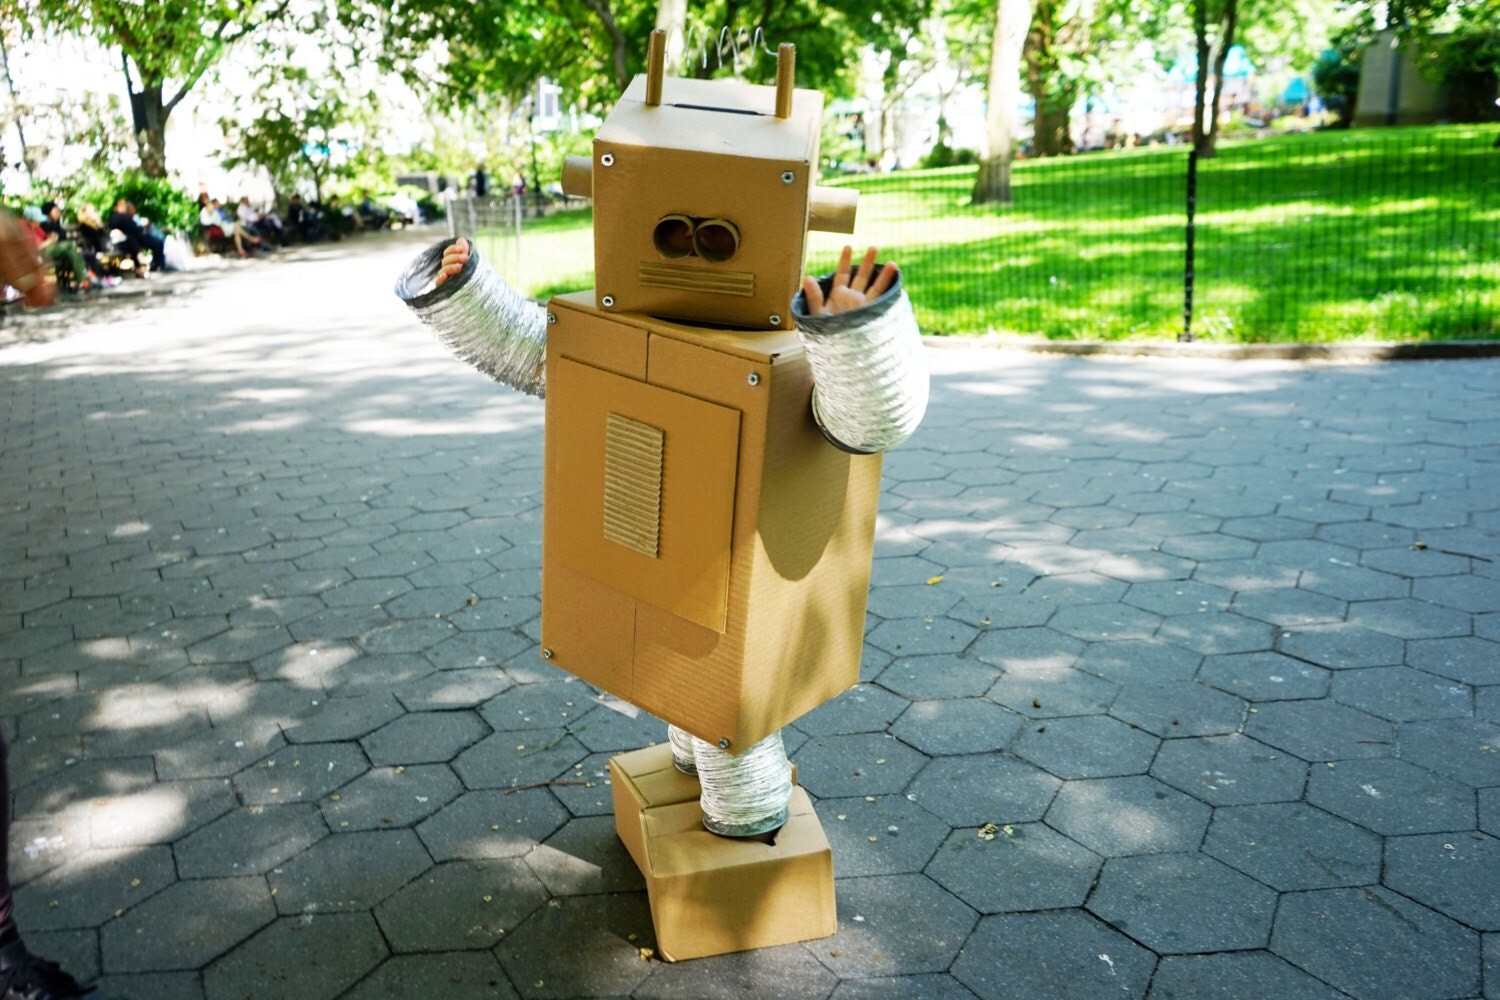 Build-your-own Cardboard Box Robot Costume